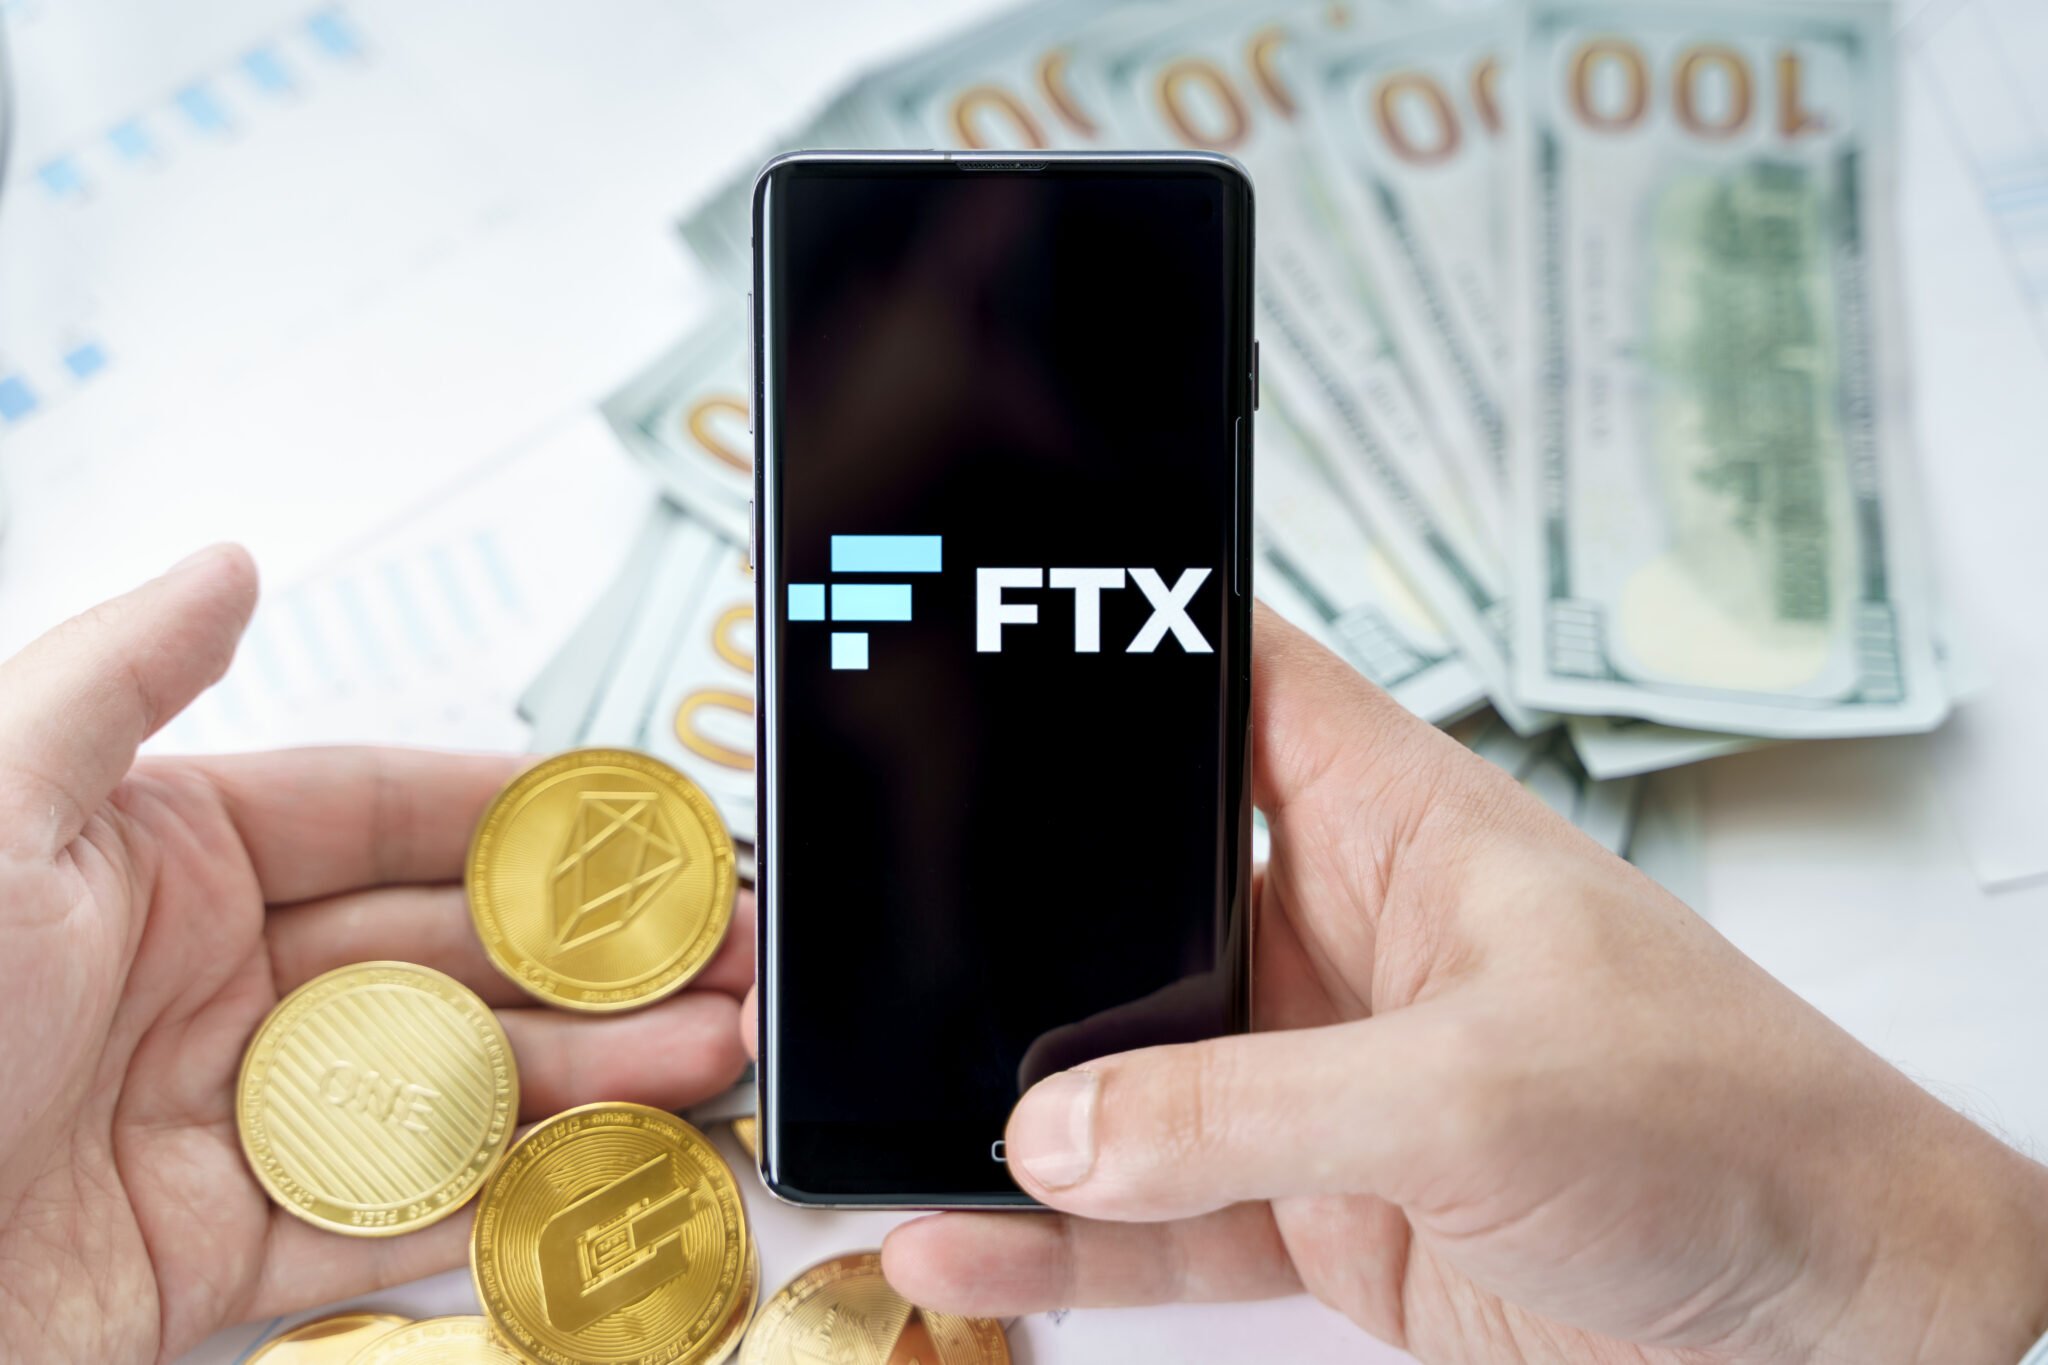 Russia Moscow 20.05.2021 FTX logo in mobile phone.Cryptocurrency decentralized exchange DEX.Trading blockchain platform.Swap,buy,sell crypto token,digital coin Bitcoin,Ethereum.Business,investing.